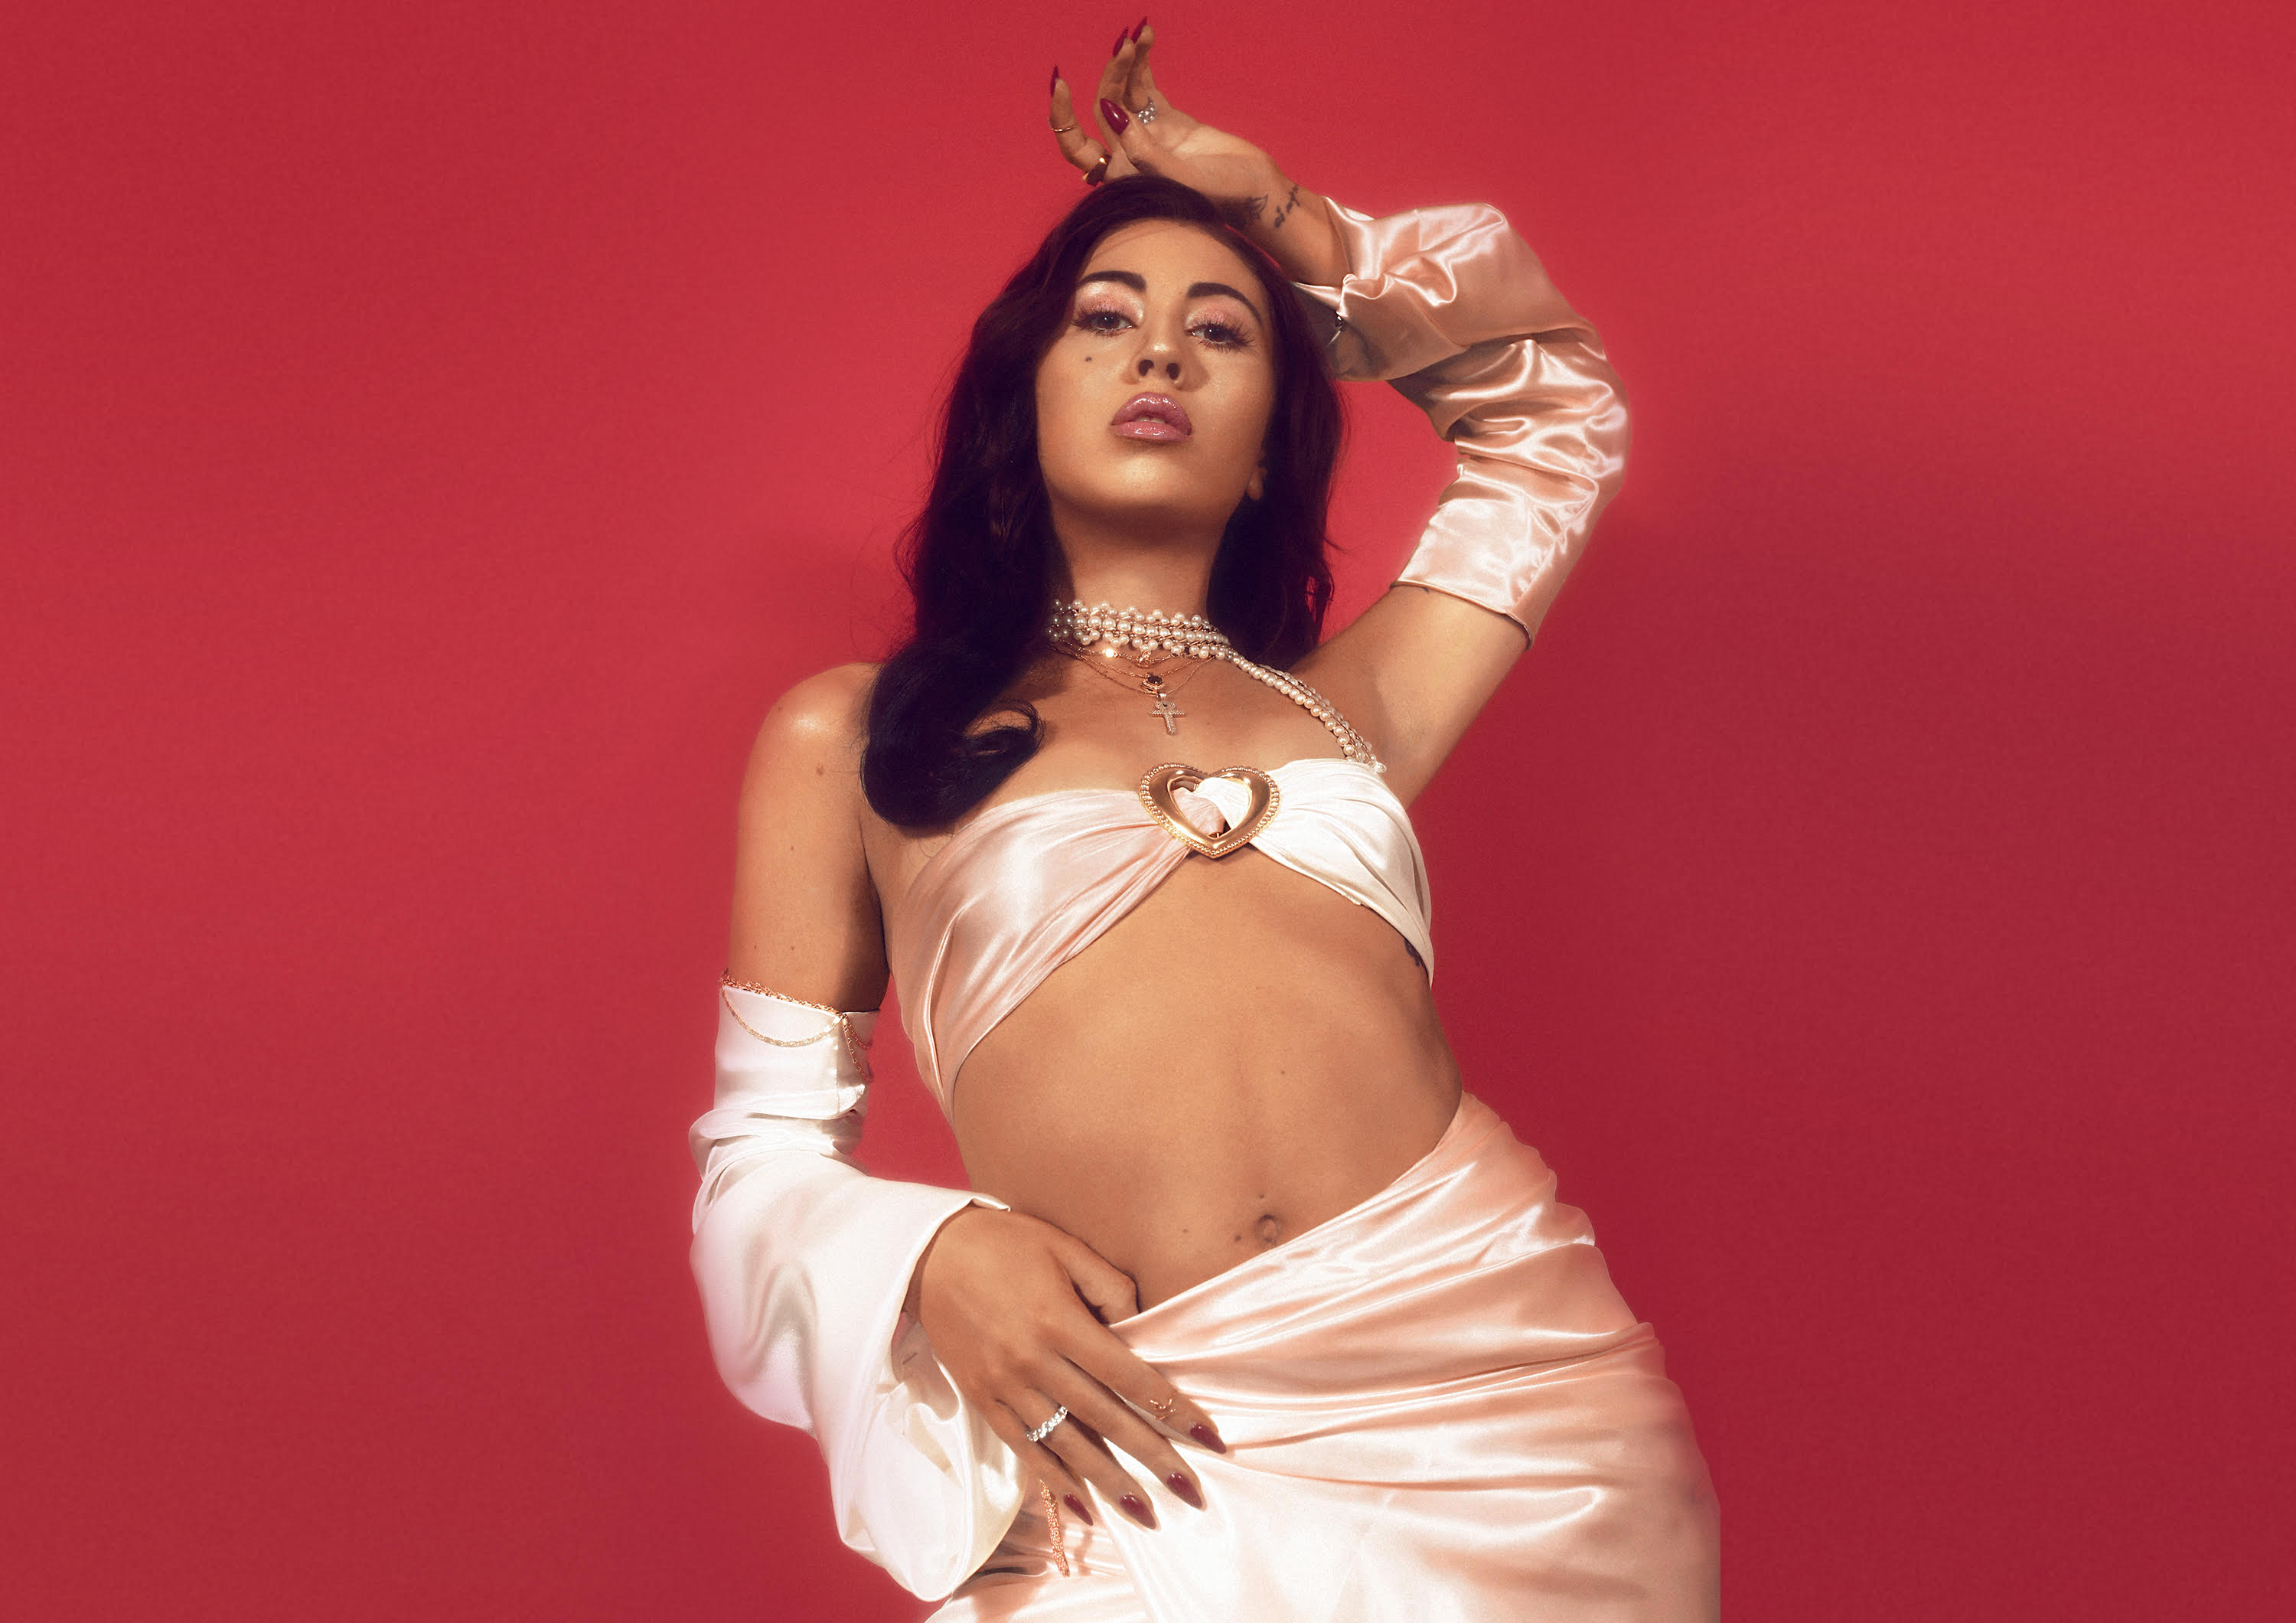 Kali Uchis on her debut album and working with Tyler, The Creator